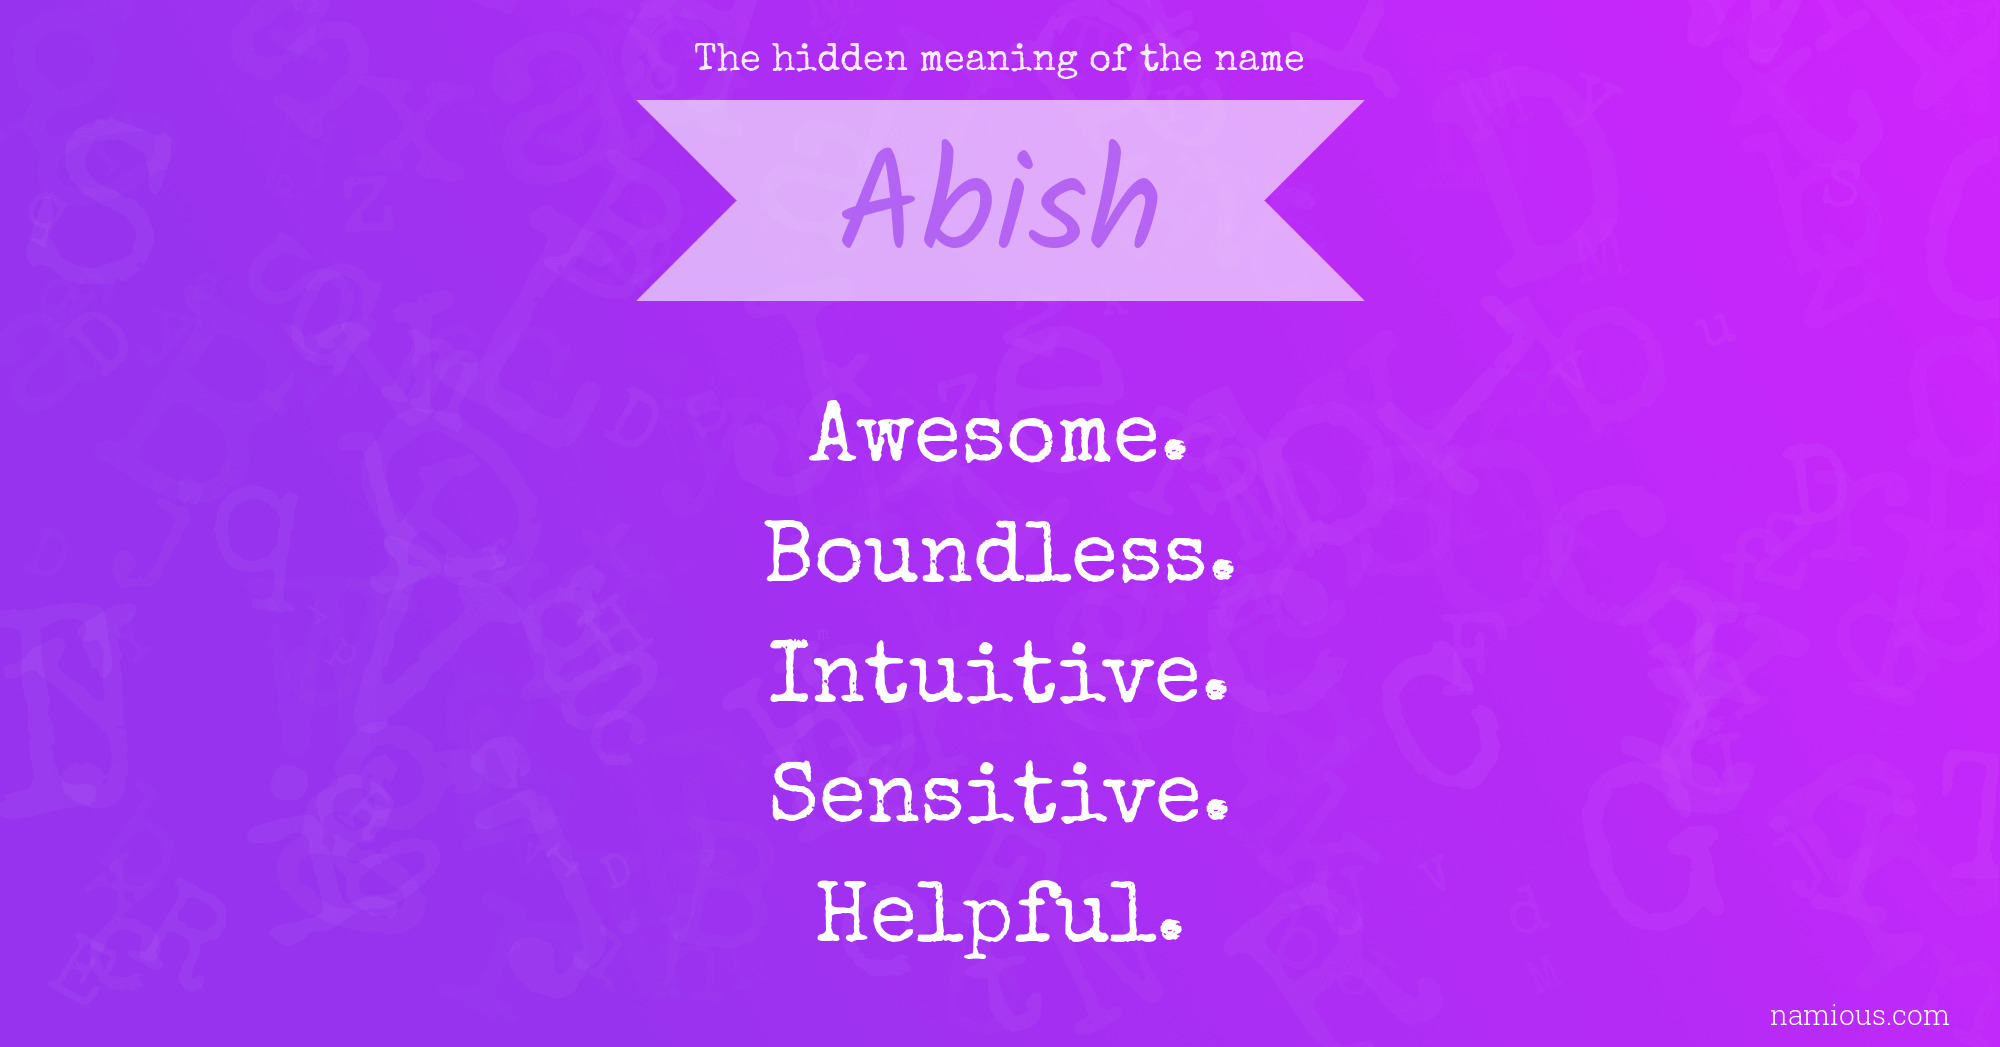 The hidden meaning of the name Abish